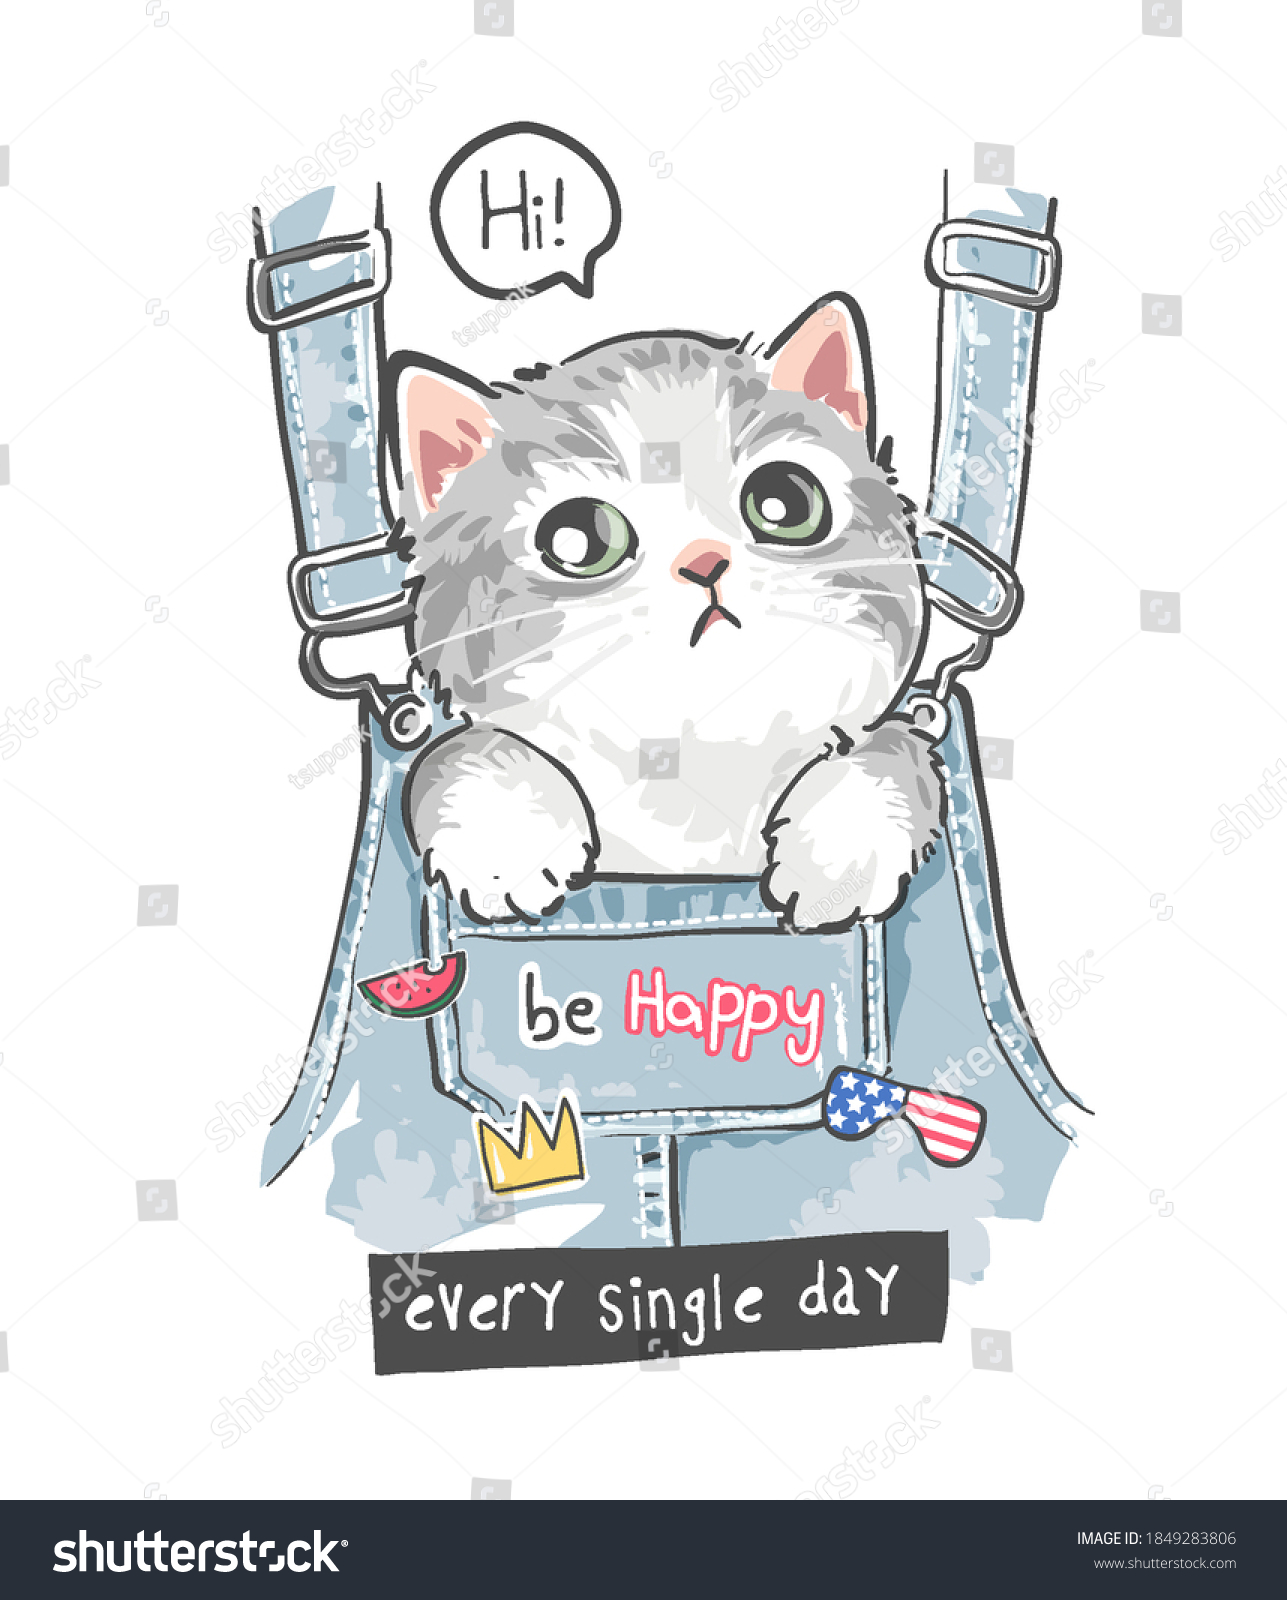 SVG of cute little kitten in front overalls pocket and colorful cute icons illustration svg